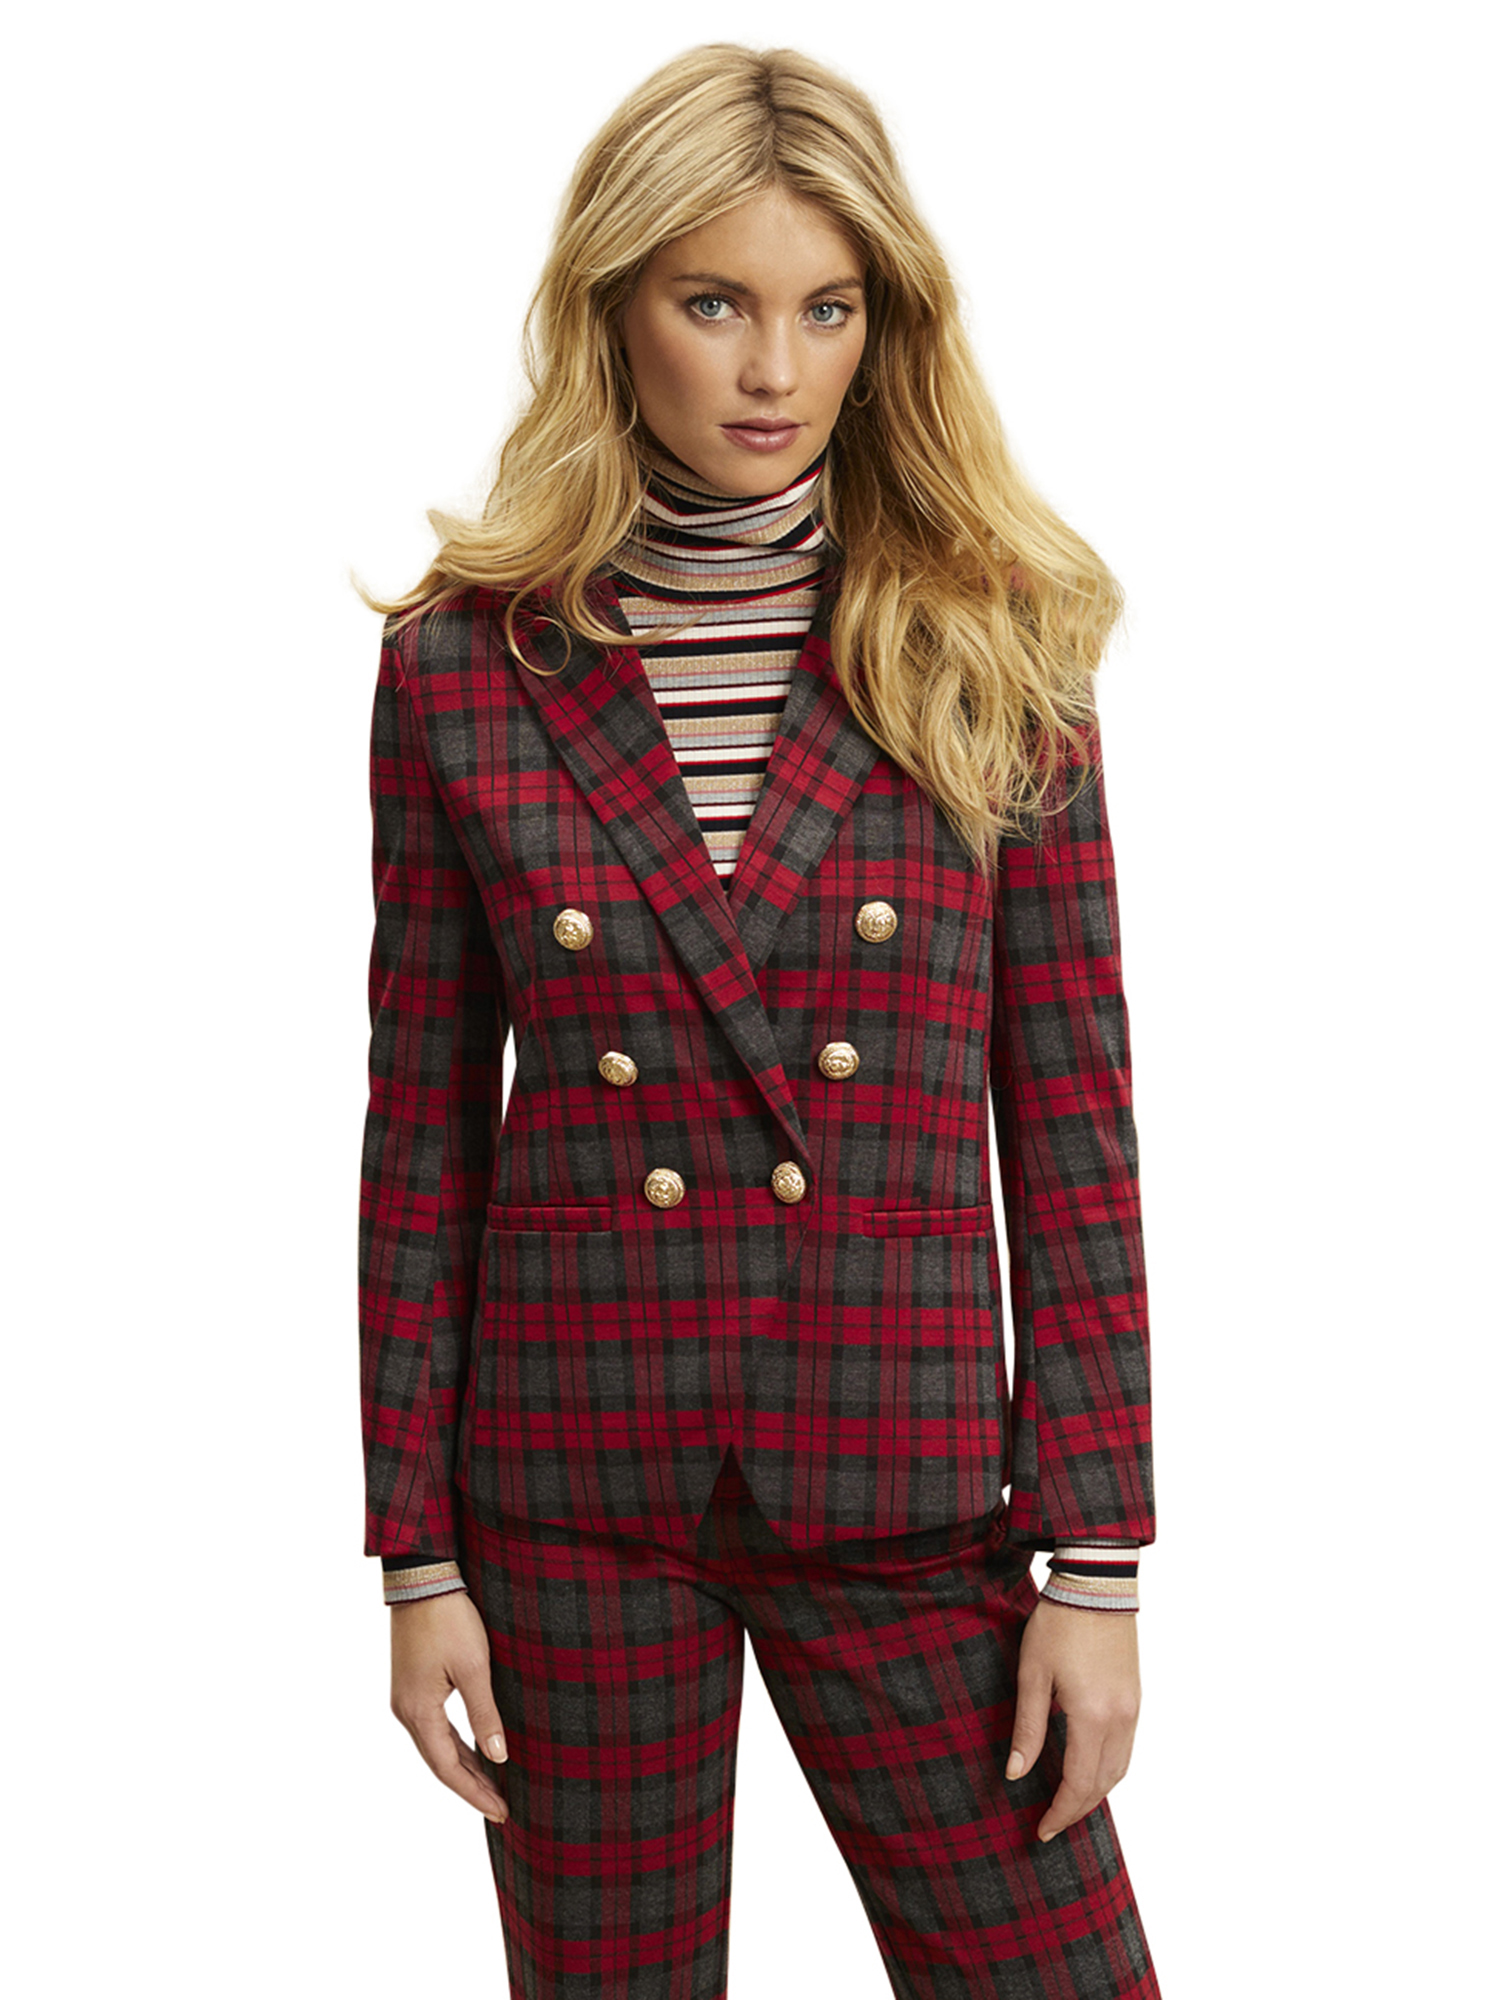 Scoop Plaid Double Breasted Blazer Women's - image 1 of 7